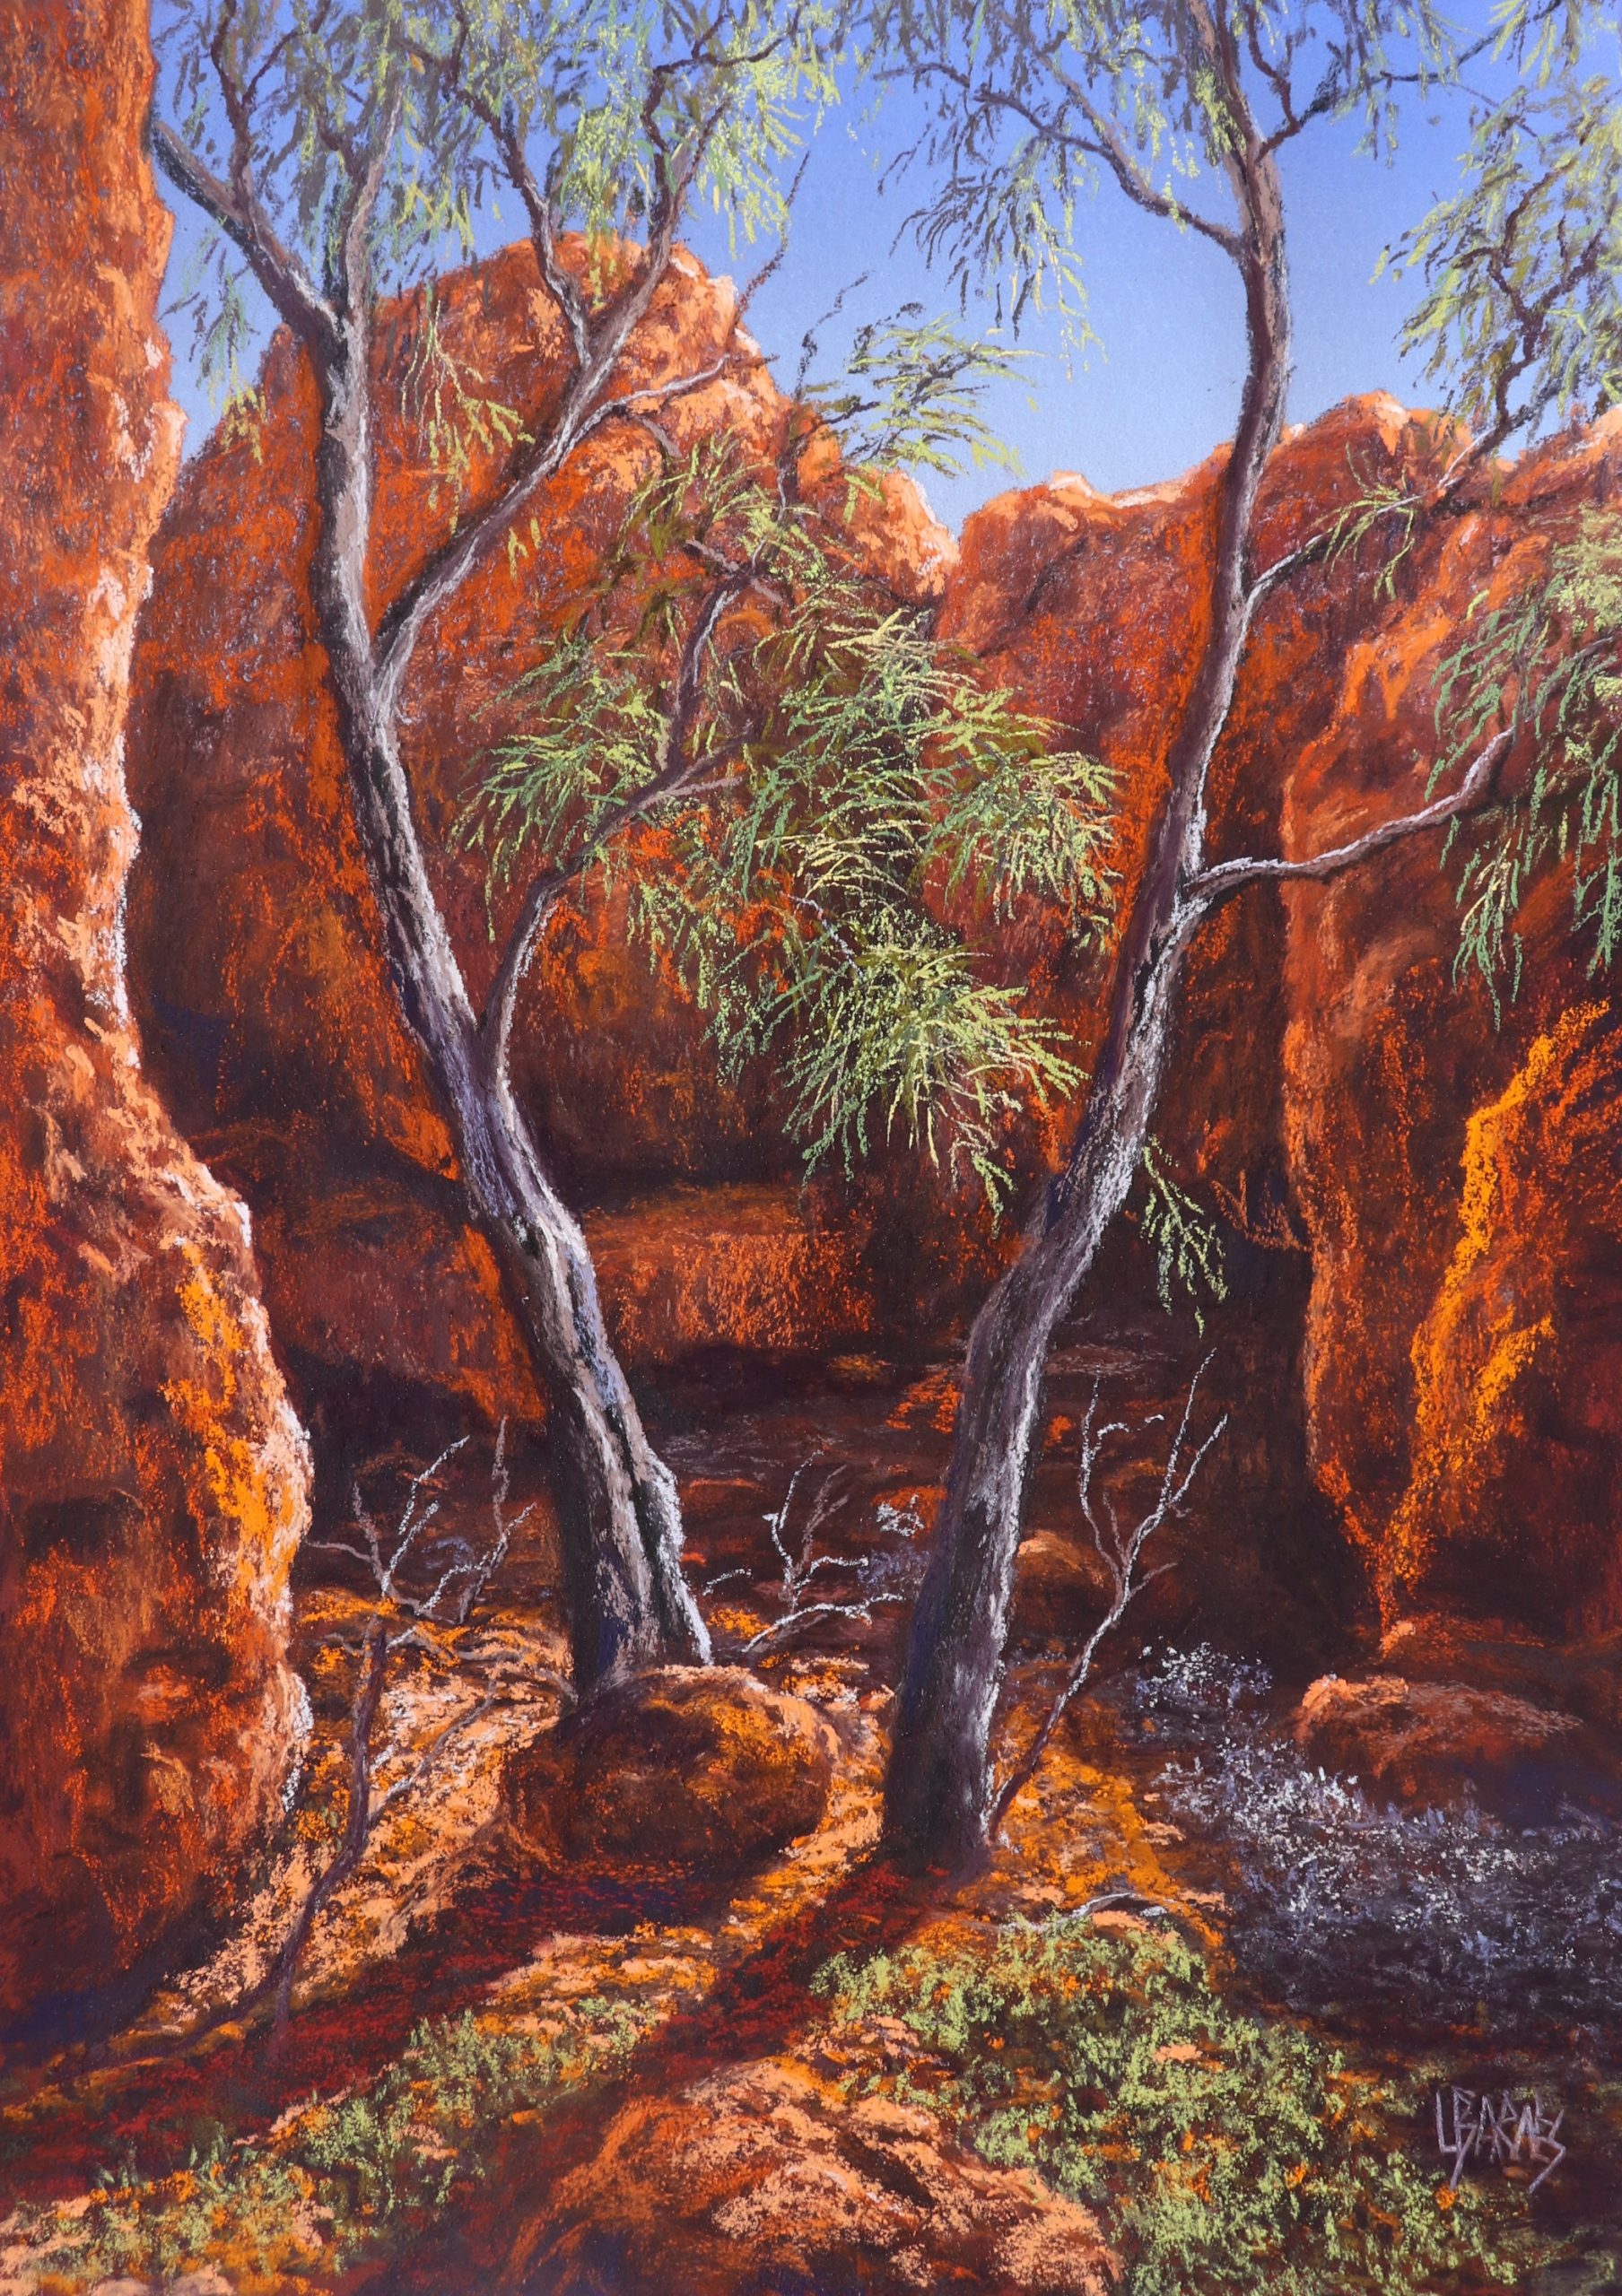 Of Rifts in the Ranges 2 Pastel on paper 470mm x 335mm $1 375.00